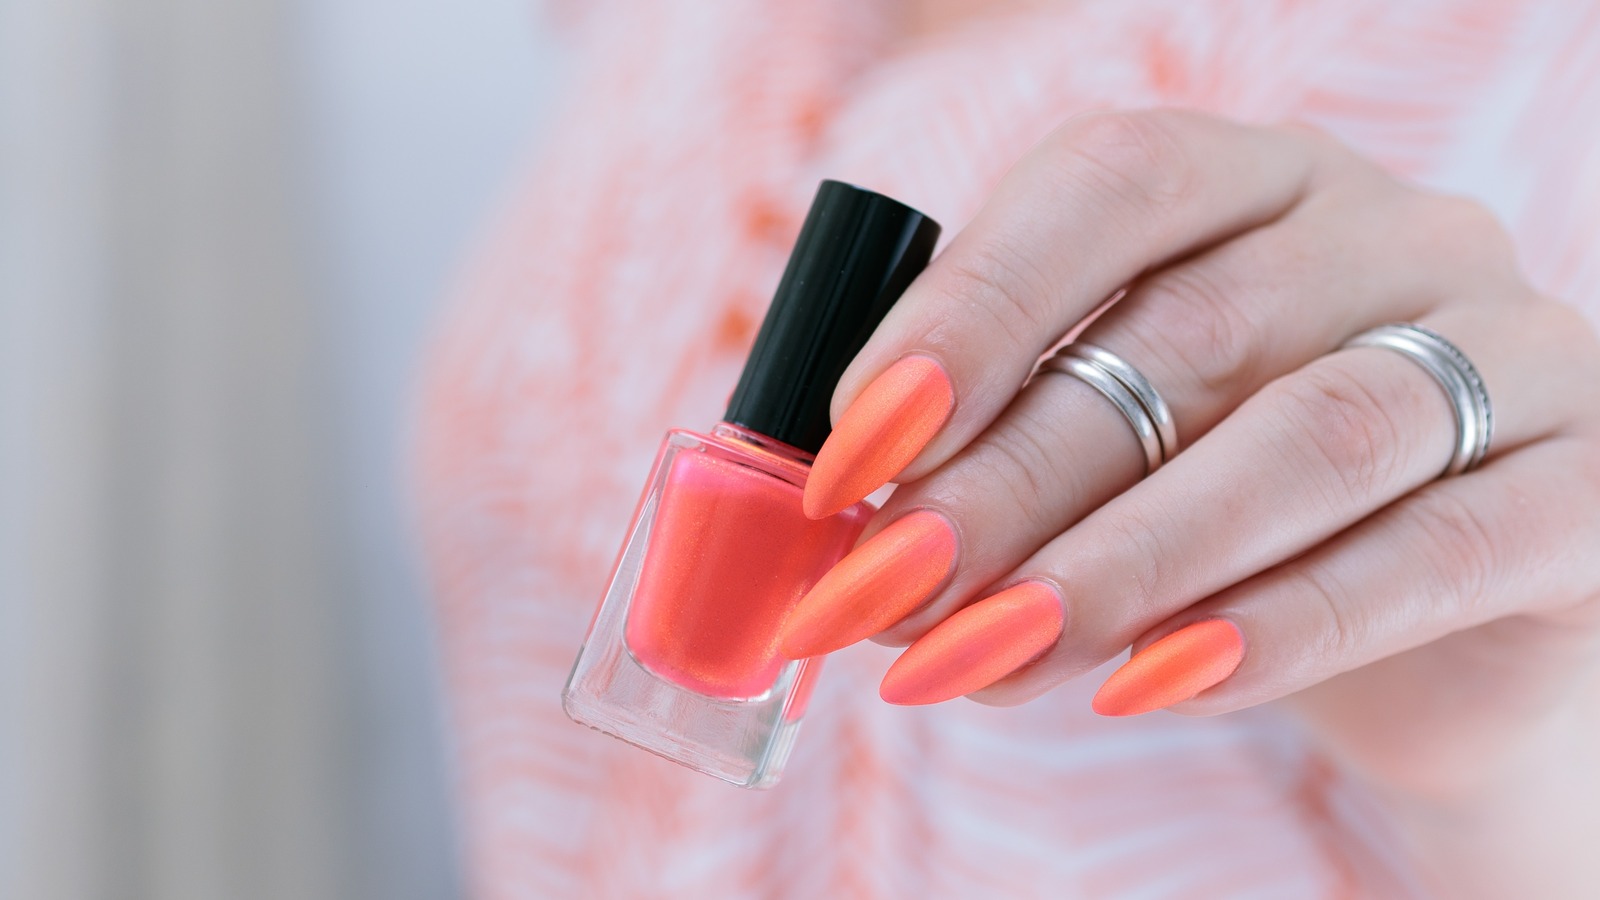 6. "Mature Nail Colors for Women Over 55" - wide 5